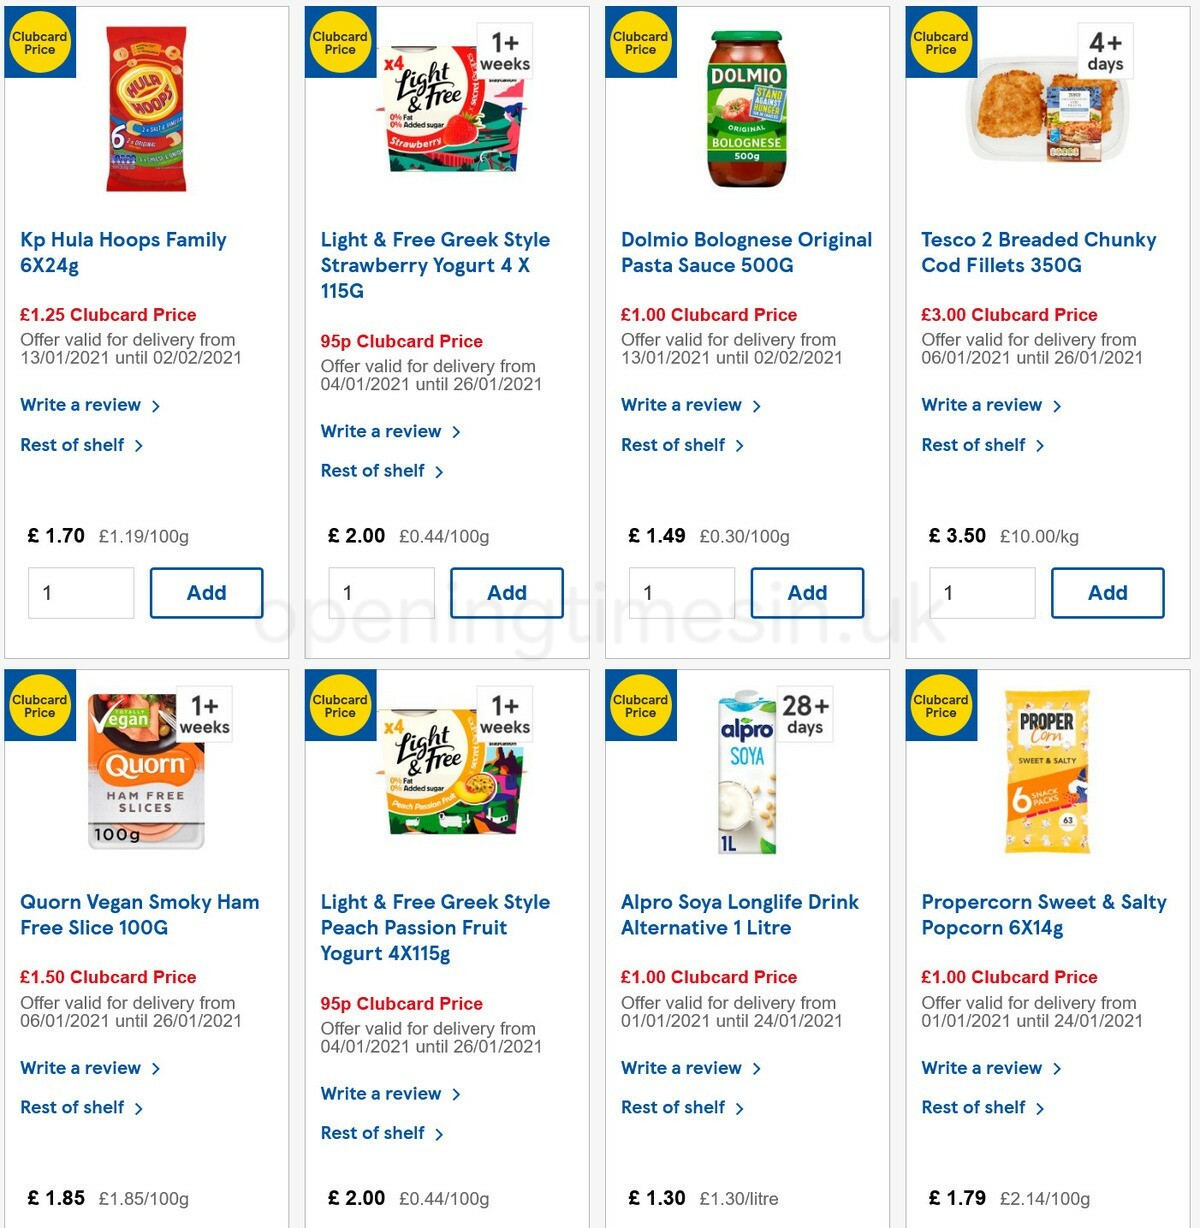 TESCO Offers from 20 January